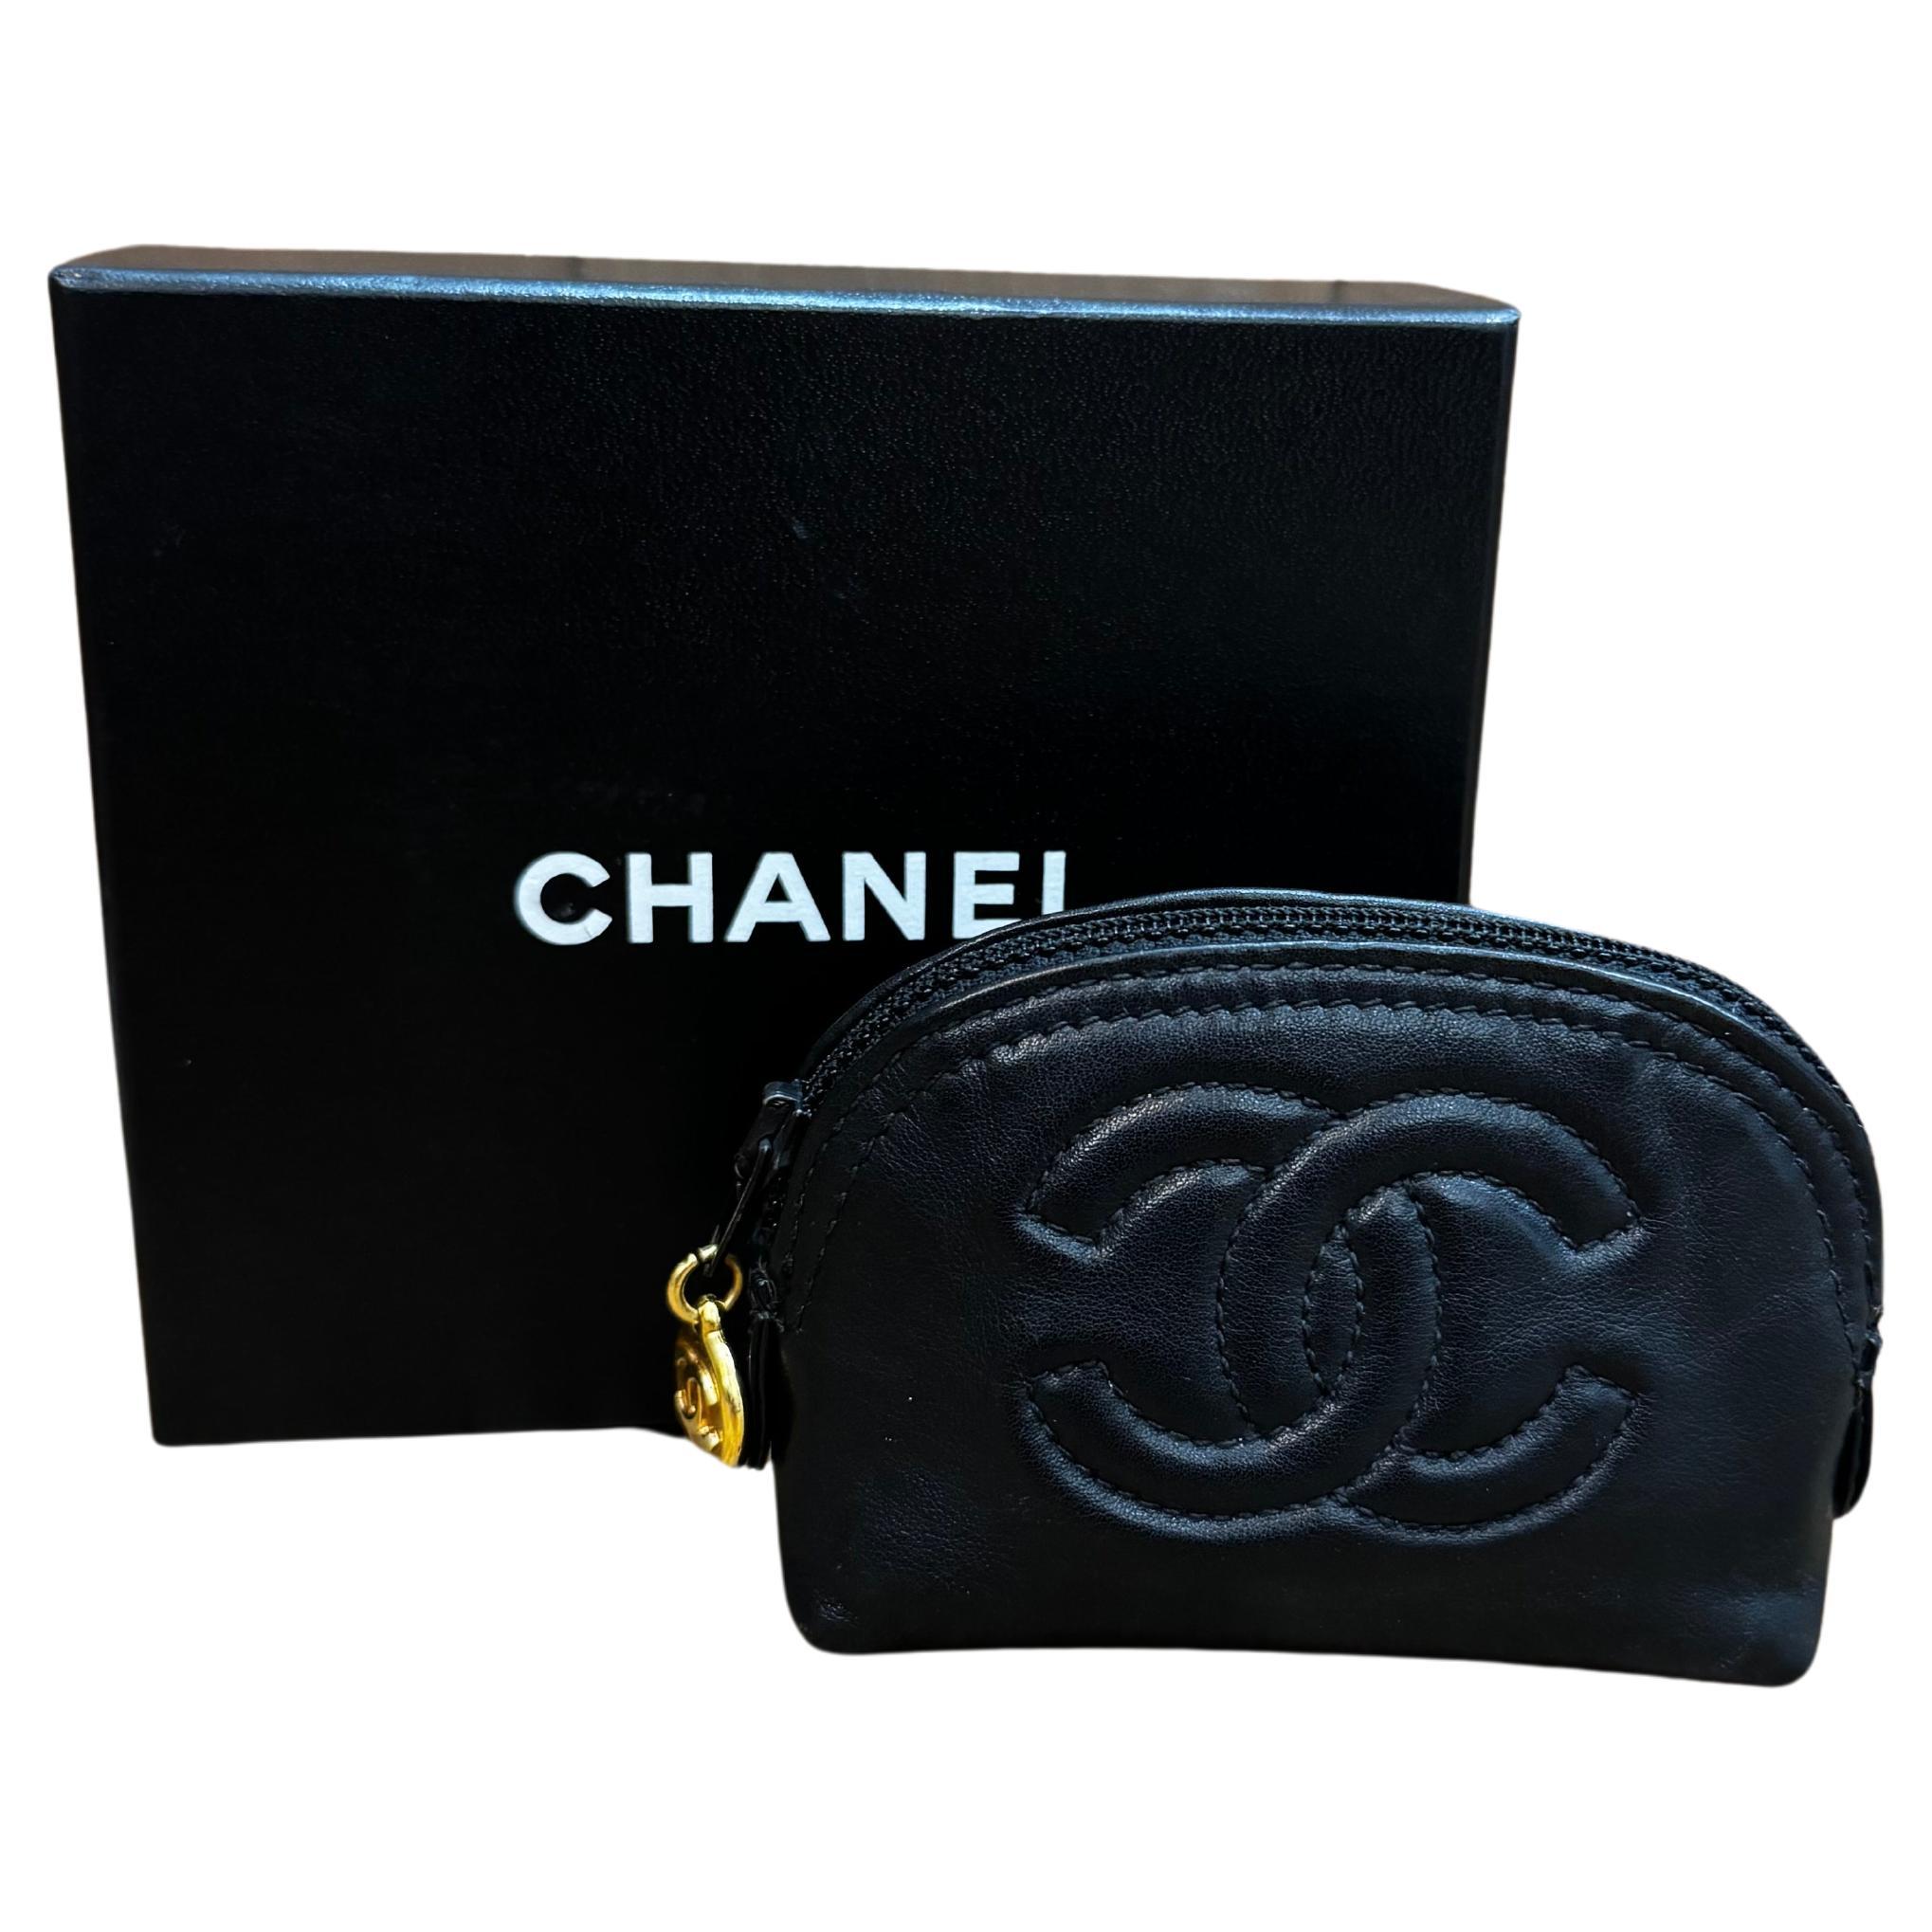 How can you tell if a Chanel wallet is real?